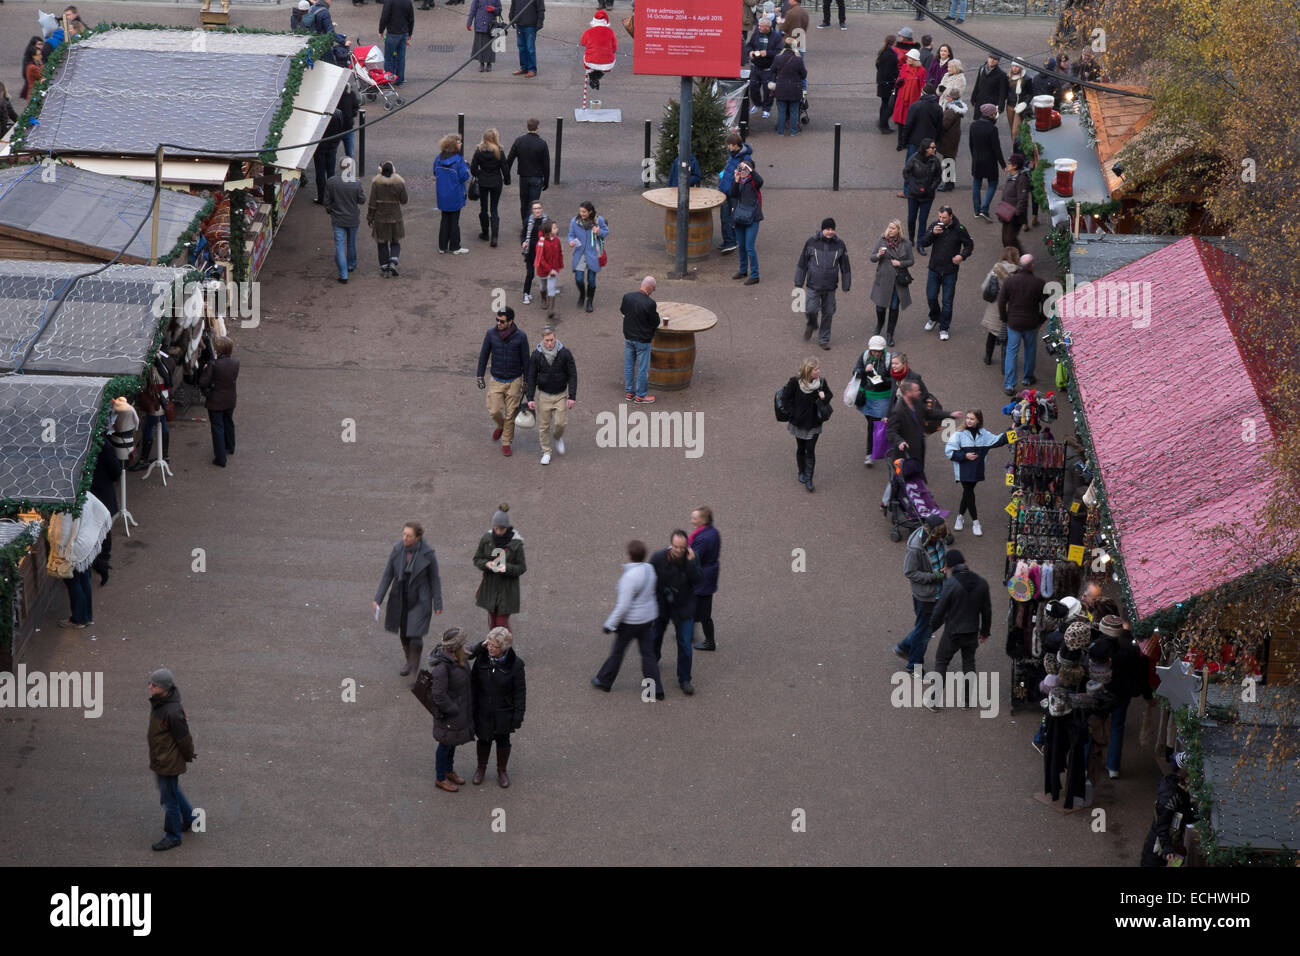 Aerial view of people shopping at London's Xmas Market at the Tate Modern Gallery Stock Photo